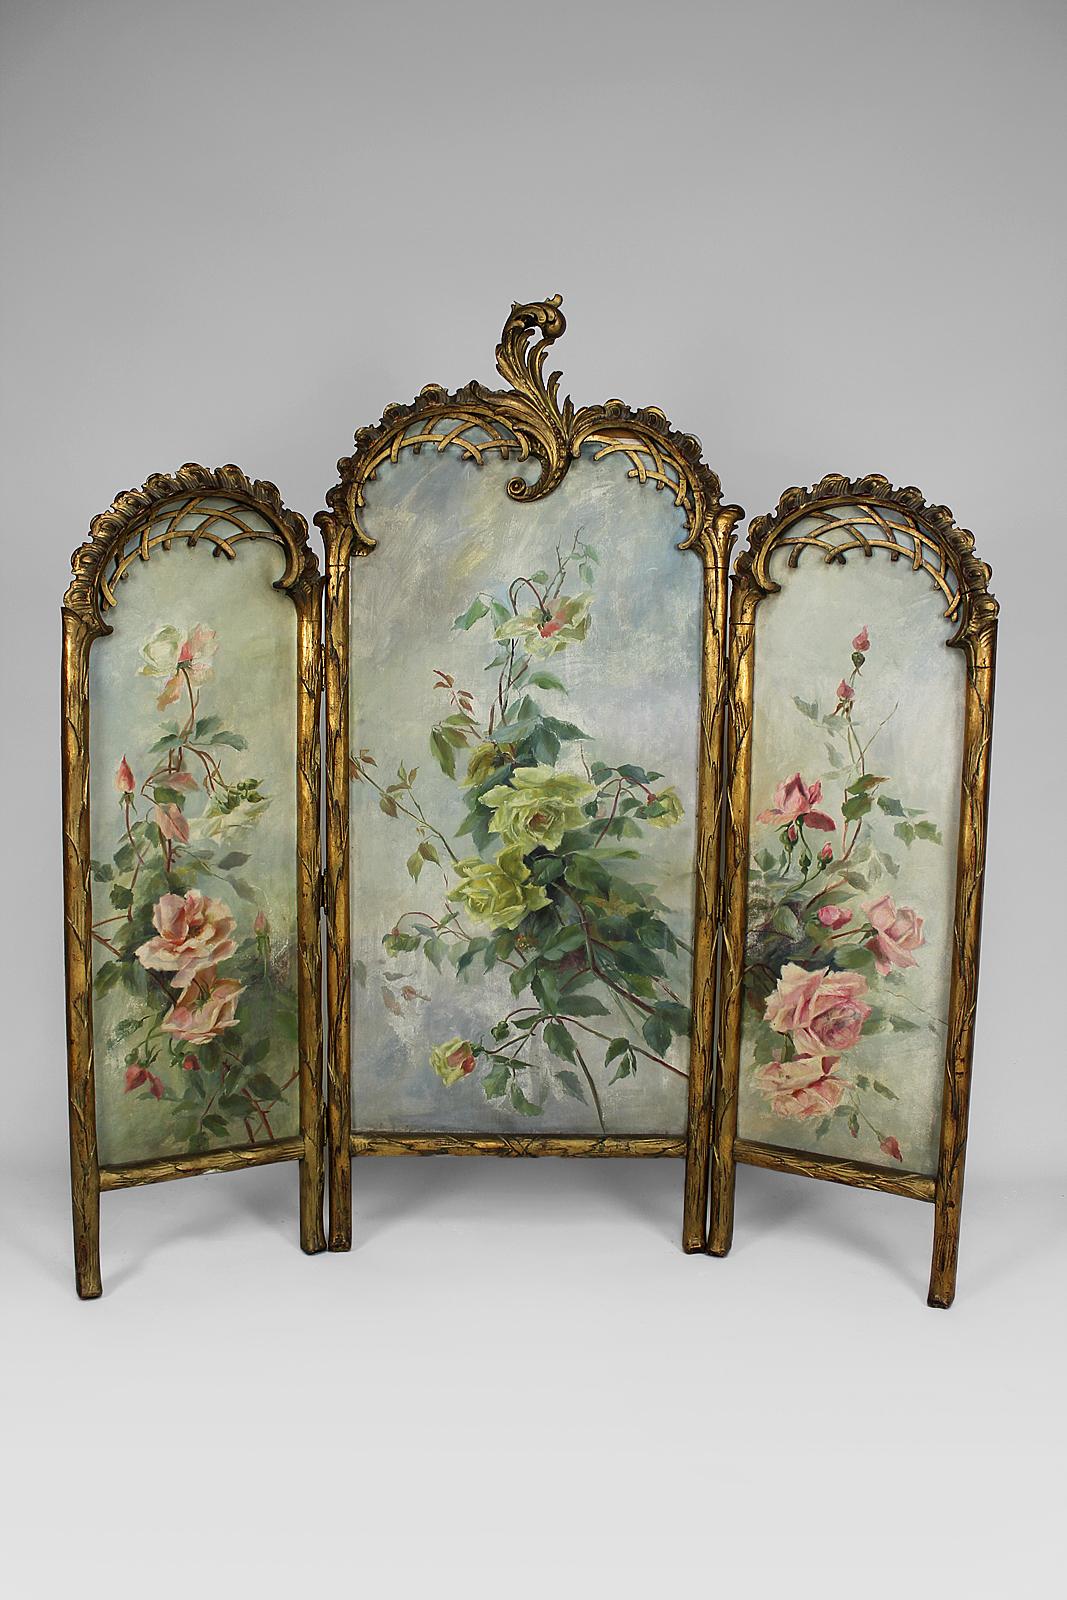 Amazing Belle Époque decorative folding screen / room divider composed of 3 panels (triptych).

Structure in gilded and carved wood.
Painted canvas panels of pink and green flowering roses.

Belle Époque eclecticism (Baroque, Rococo, Louis XV,